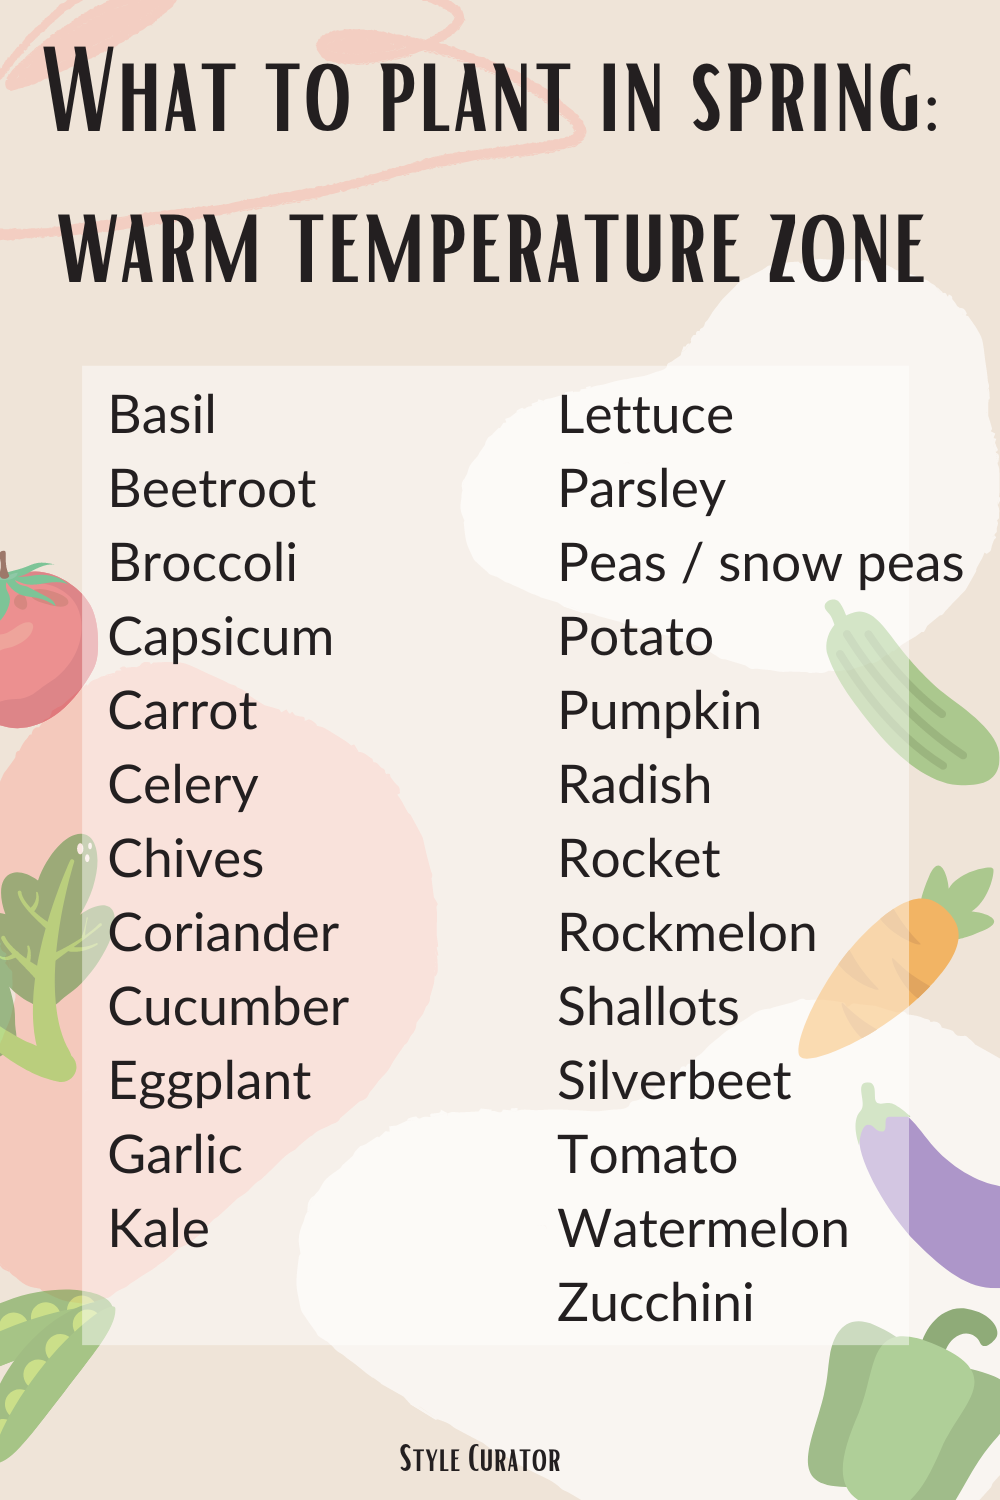 What to plant in spring in Australia - warm climate zone